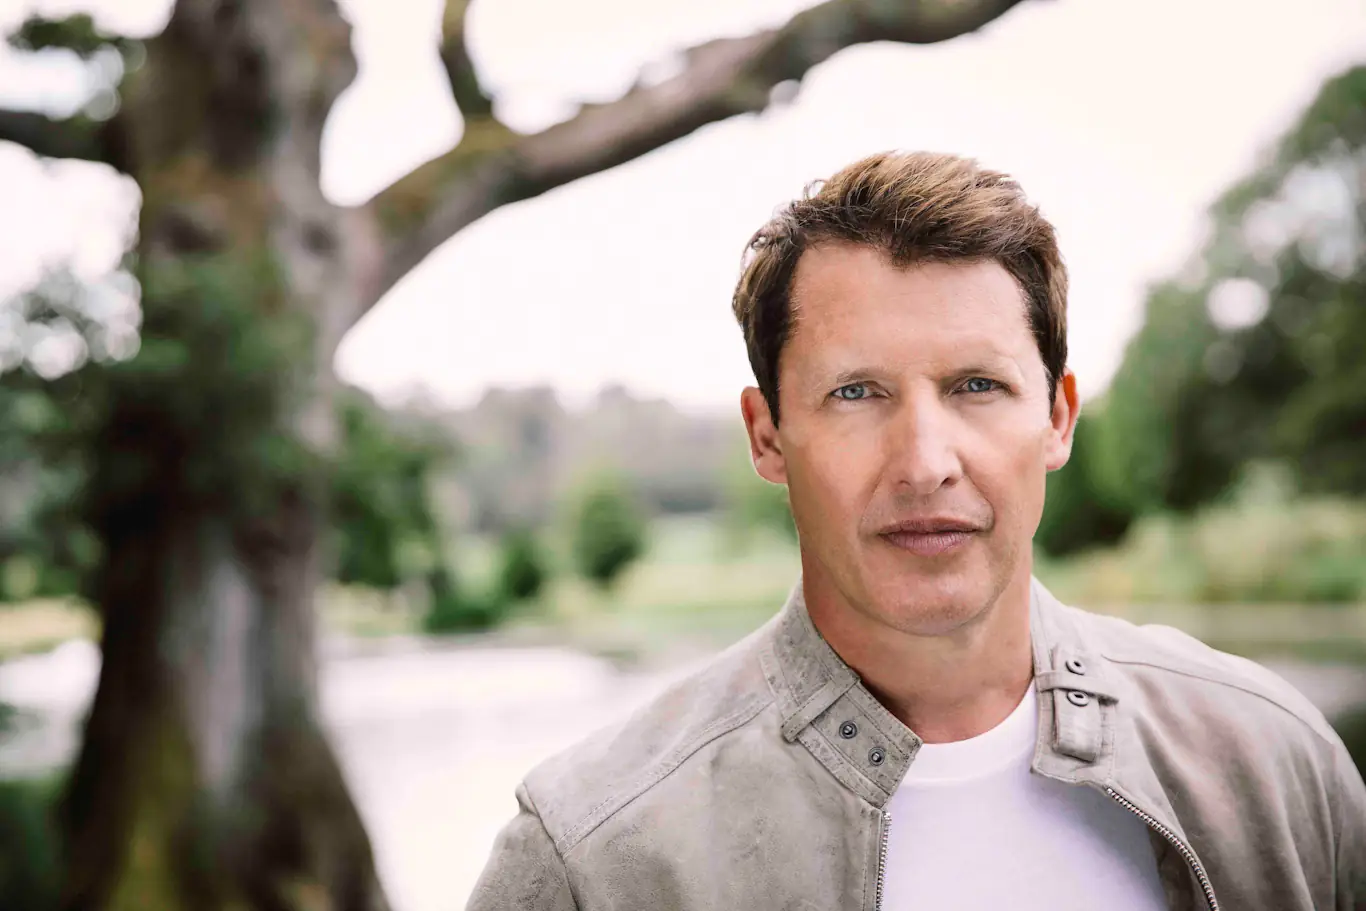 JAMES BLUNT touches on loss in new single ‘The Girl That Never Was’